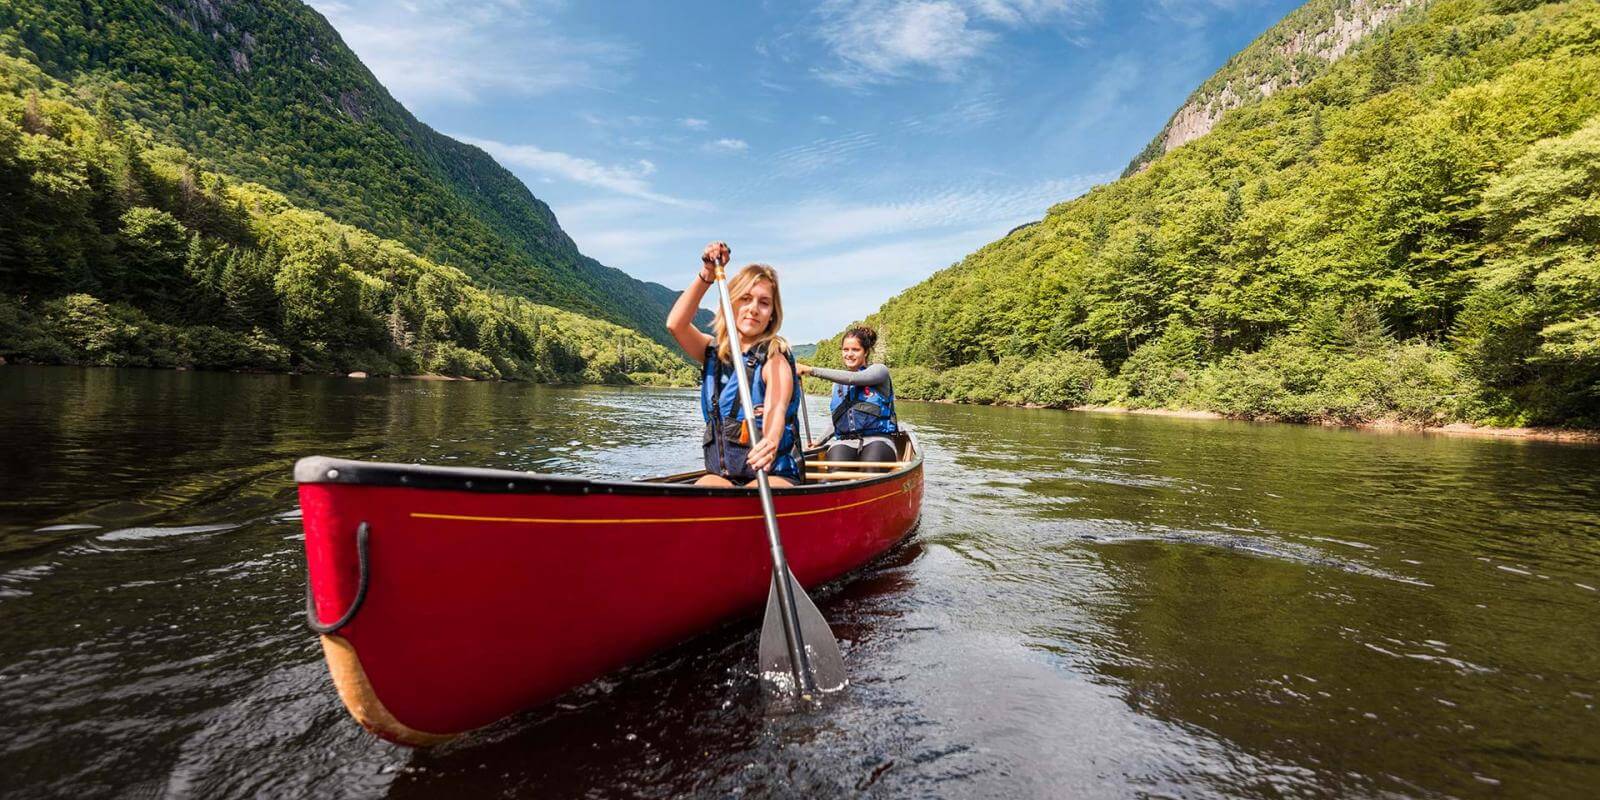 Two young women canoe in the river at the bottom of the valley, in Jacques-Cartier National Park.